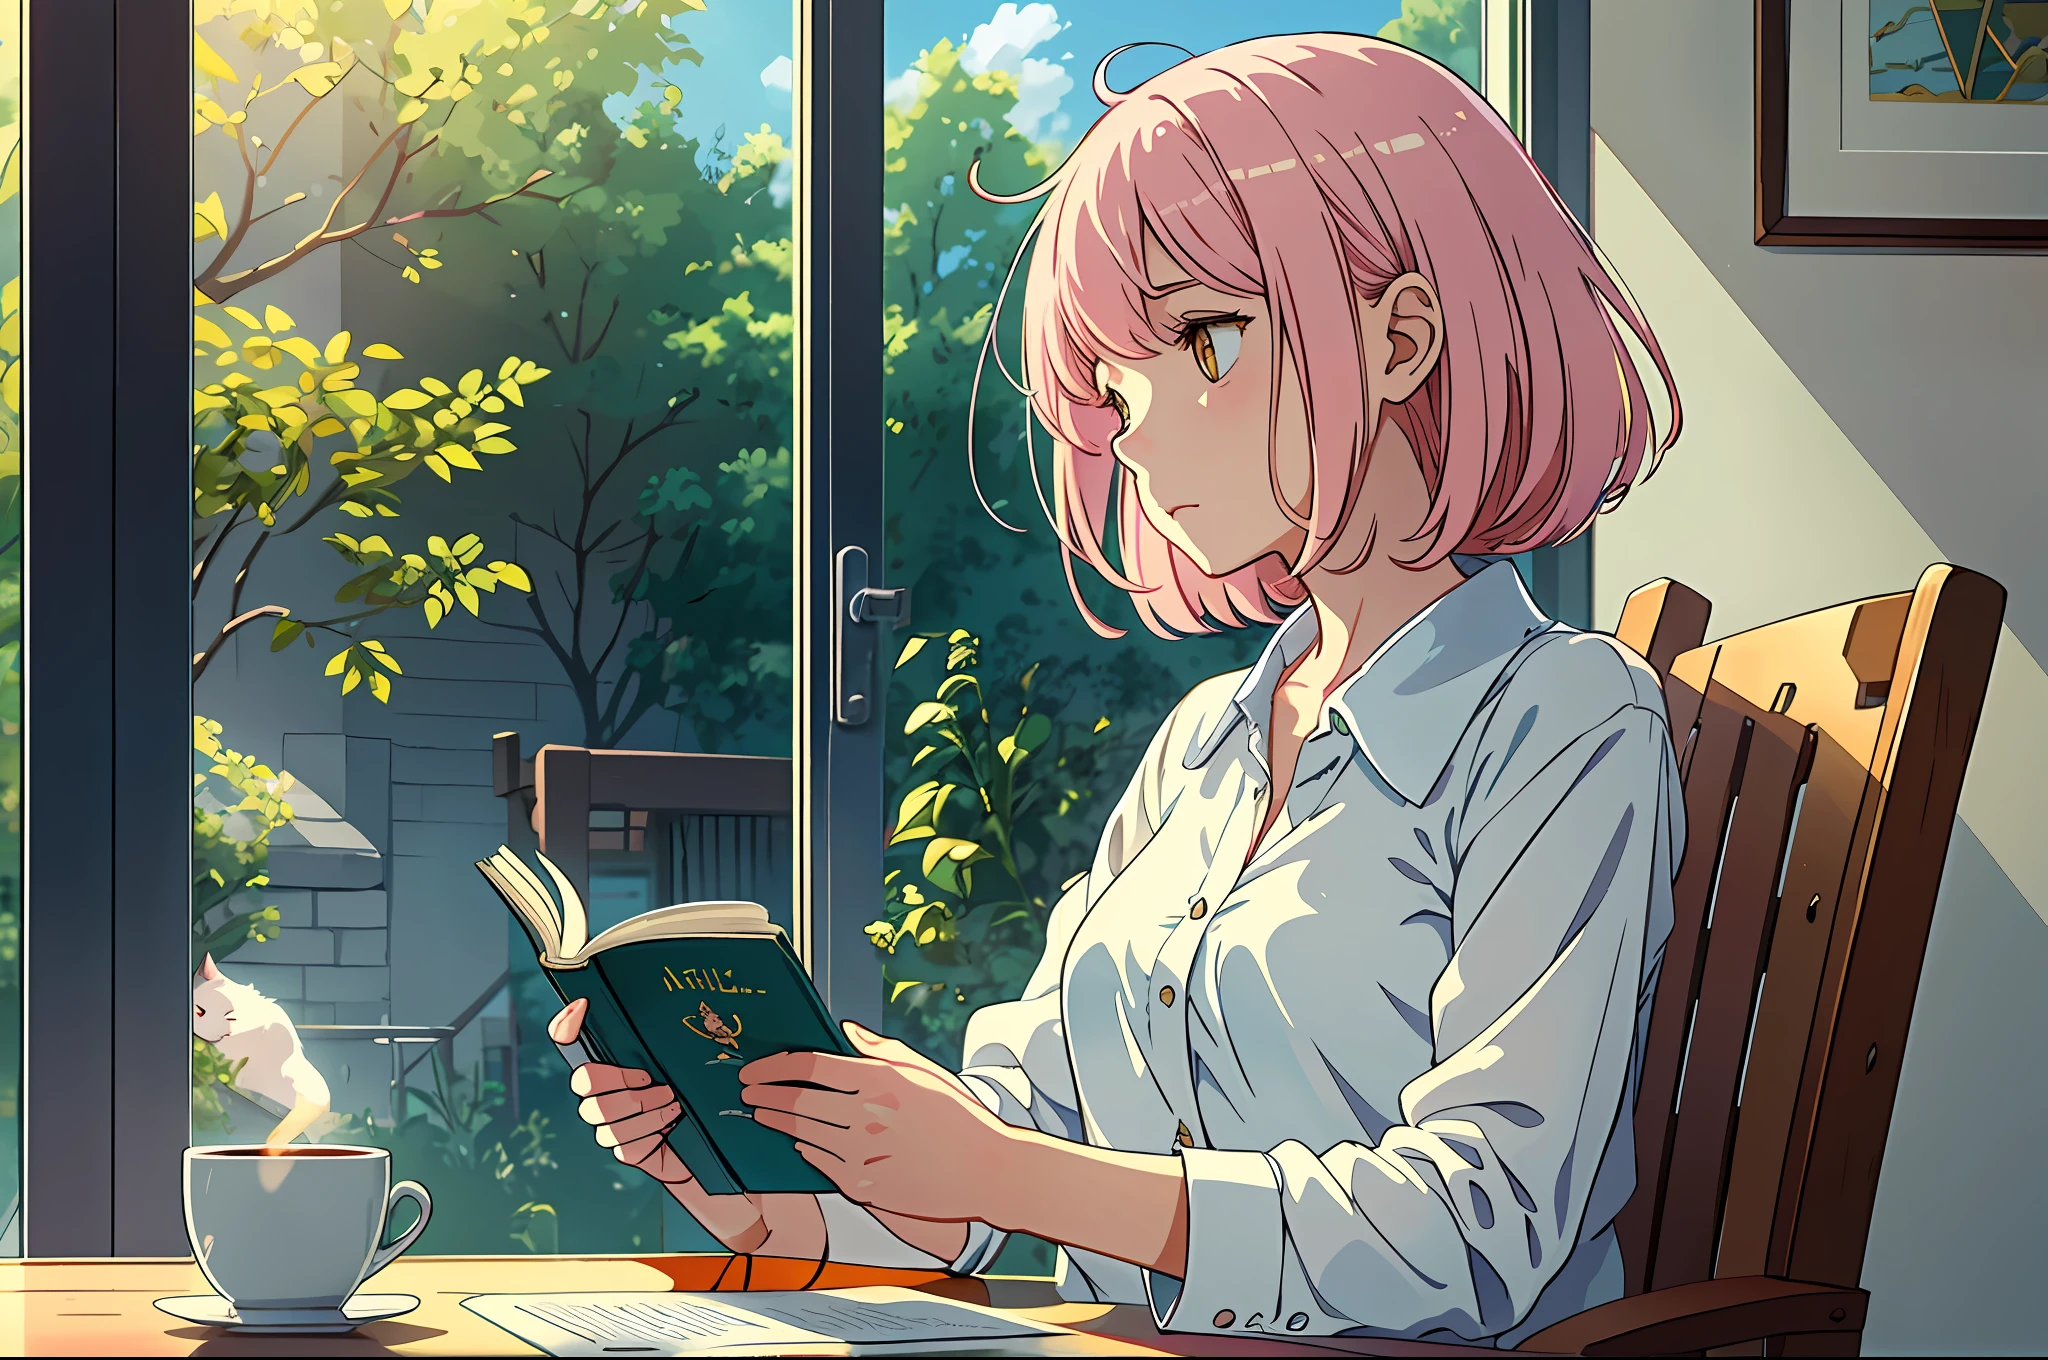 sunlight,physics-based rendering, Masterpiece, 1 girl, Delicate Face Soft, gentle, profile face, lovely small breasts, pink hair, no makeup, short blouse, profile, sitting in a chair, reading book, window in the background with minimalist details, coffee cup on the table,highest quality, soft colors, sunny day, studio ghibli, anime scene, depth of field,  1 white cat sleeping, perfect and simplified cat anatomy, minimalist scenario focus on the character,